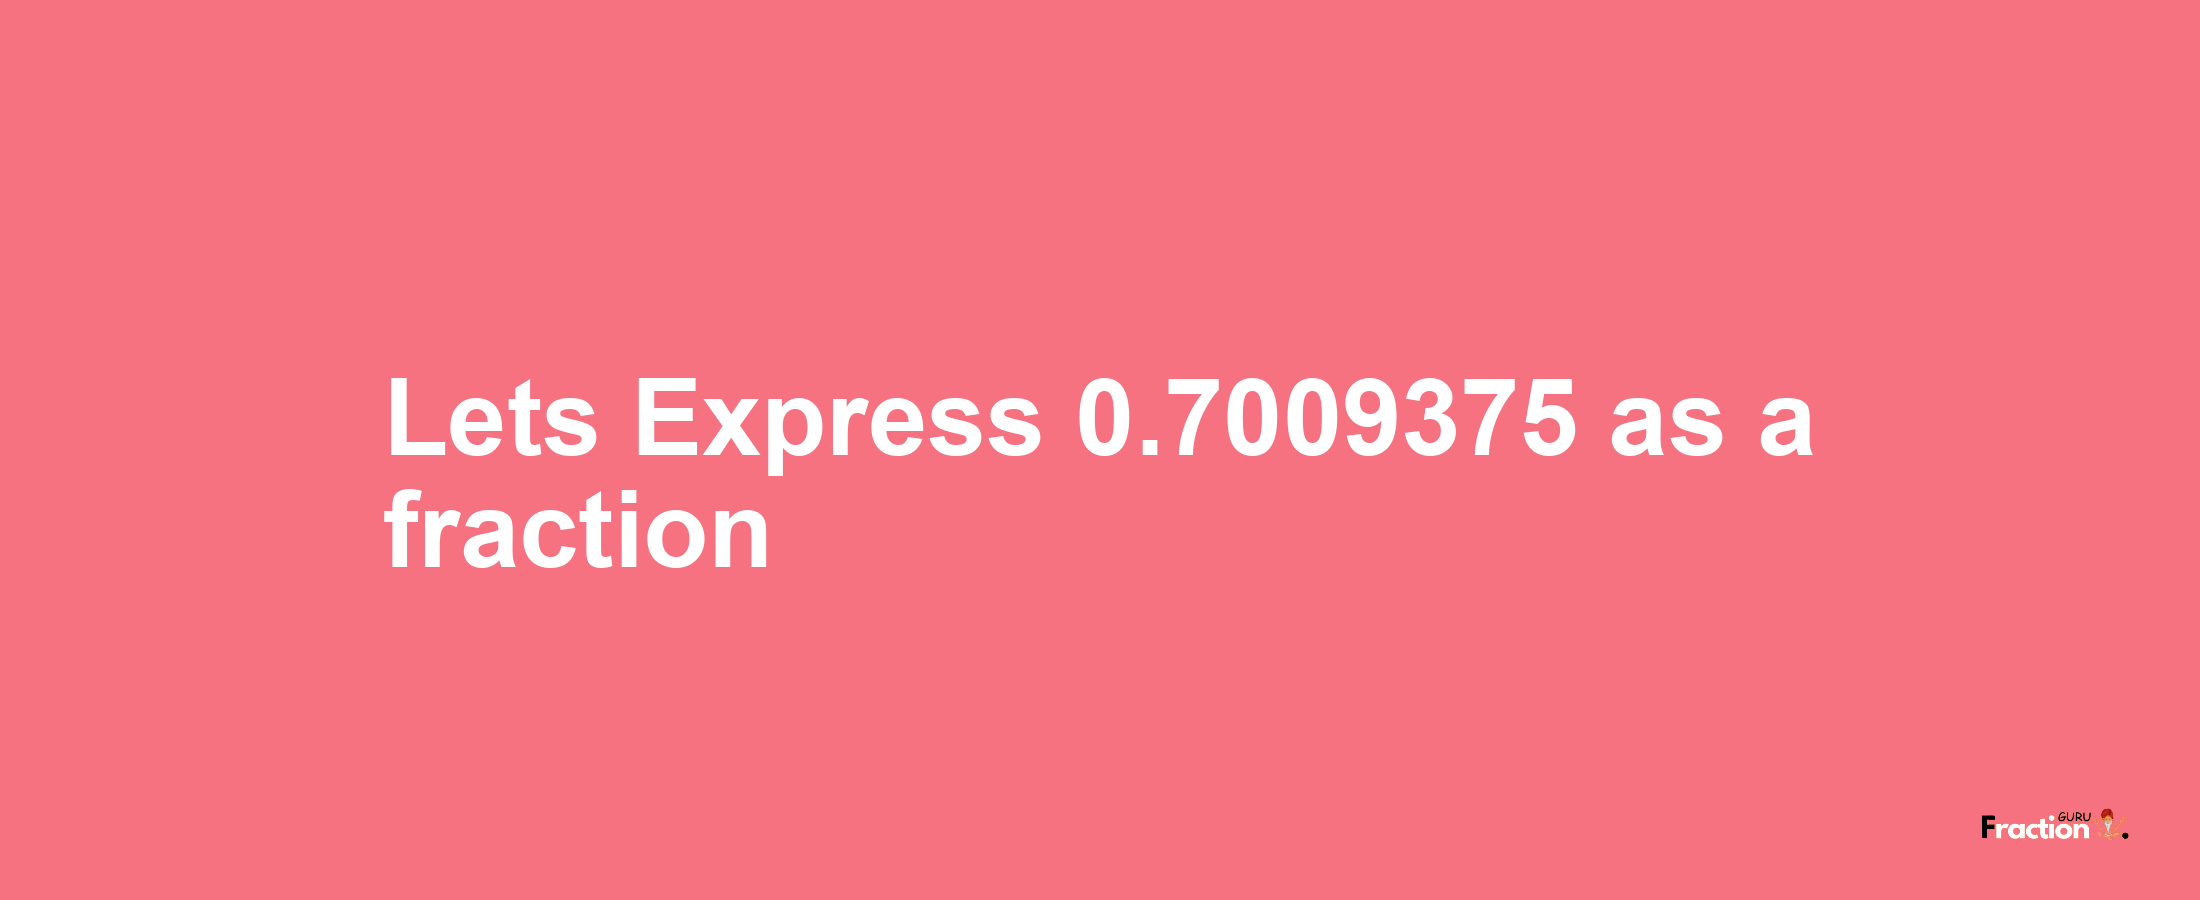 Lets Express 0.7009375 as afraction